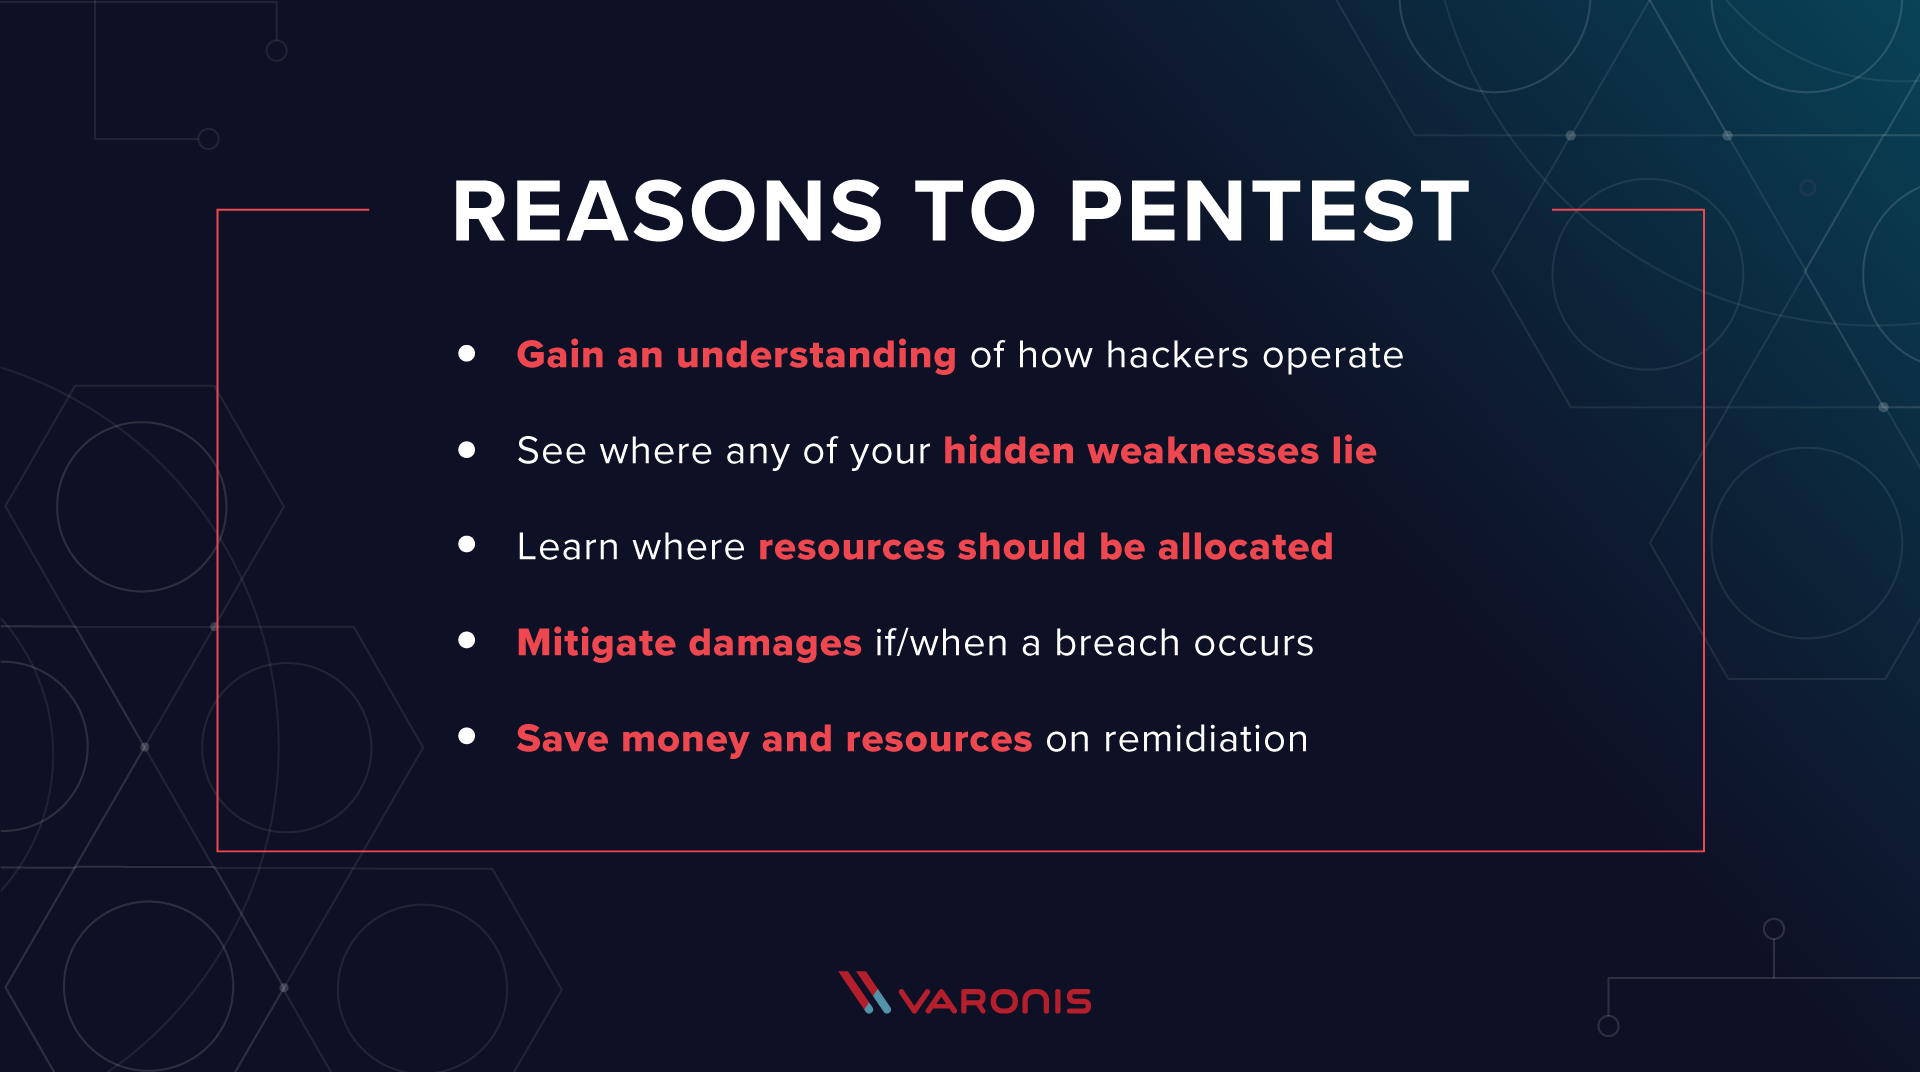 reasons to pentest - a text image that's title says "Reasons to Pentest" and the bulleted copy below says: "Gain an understanding of how hackers operate. See where any of your hidden weaknesses lie. Learn where resources should be allocated. Mitigate damages if/when a breach occurs. Save money and resources on remediation."